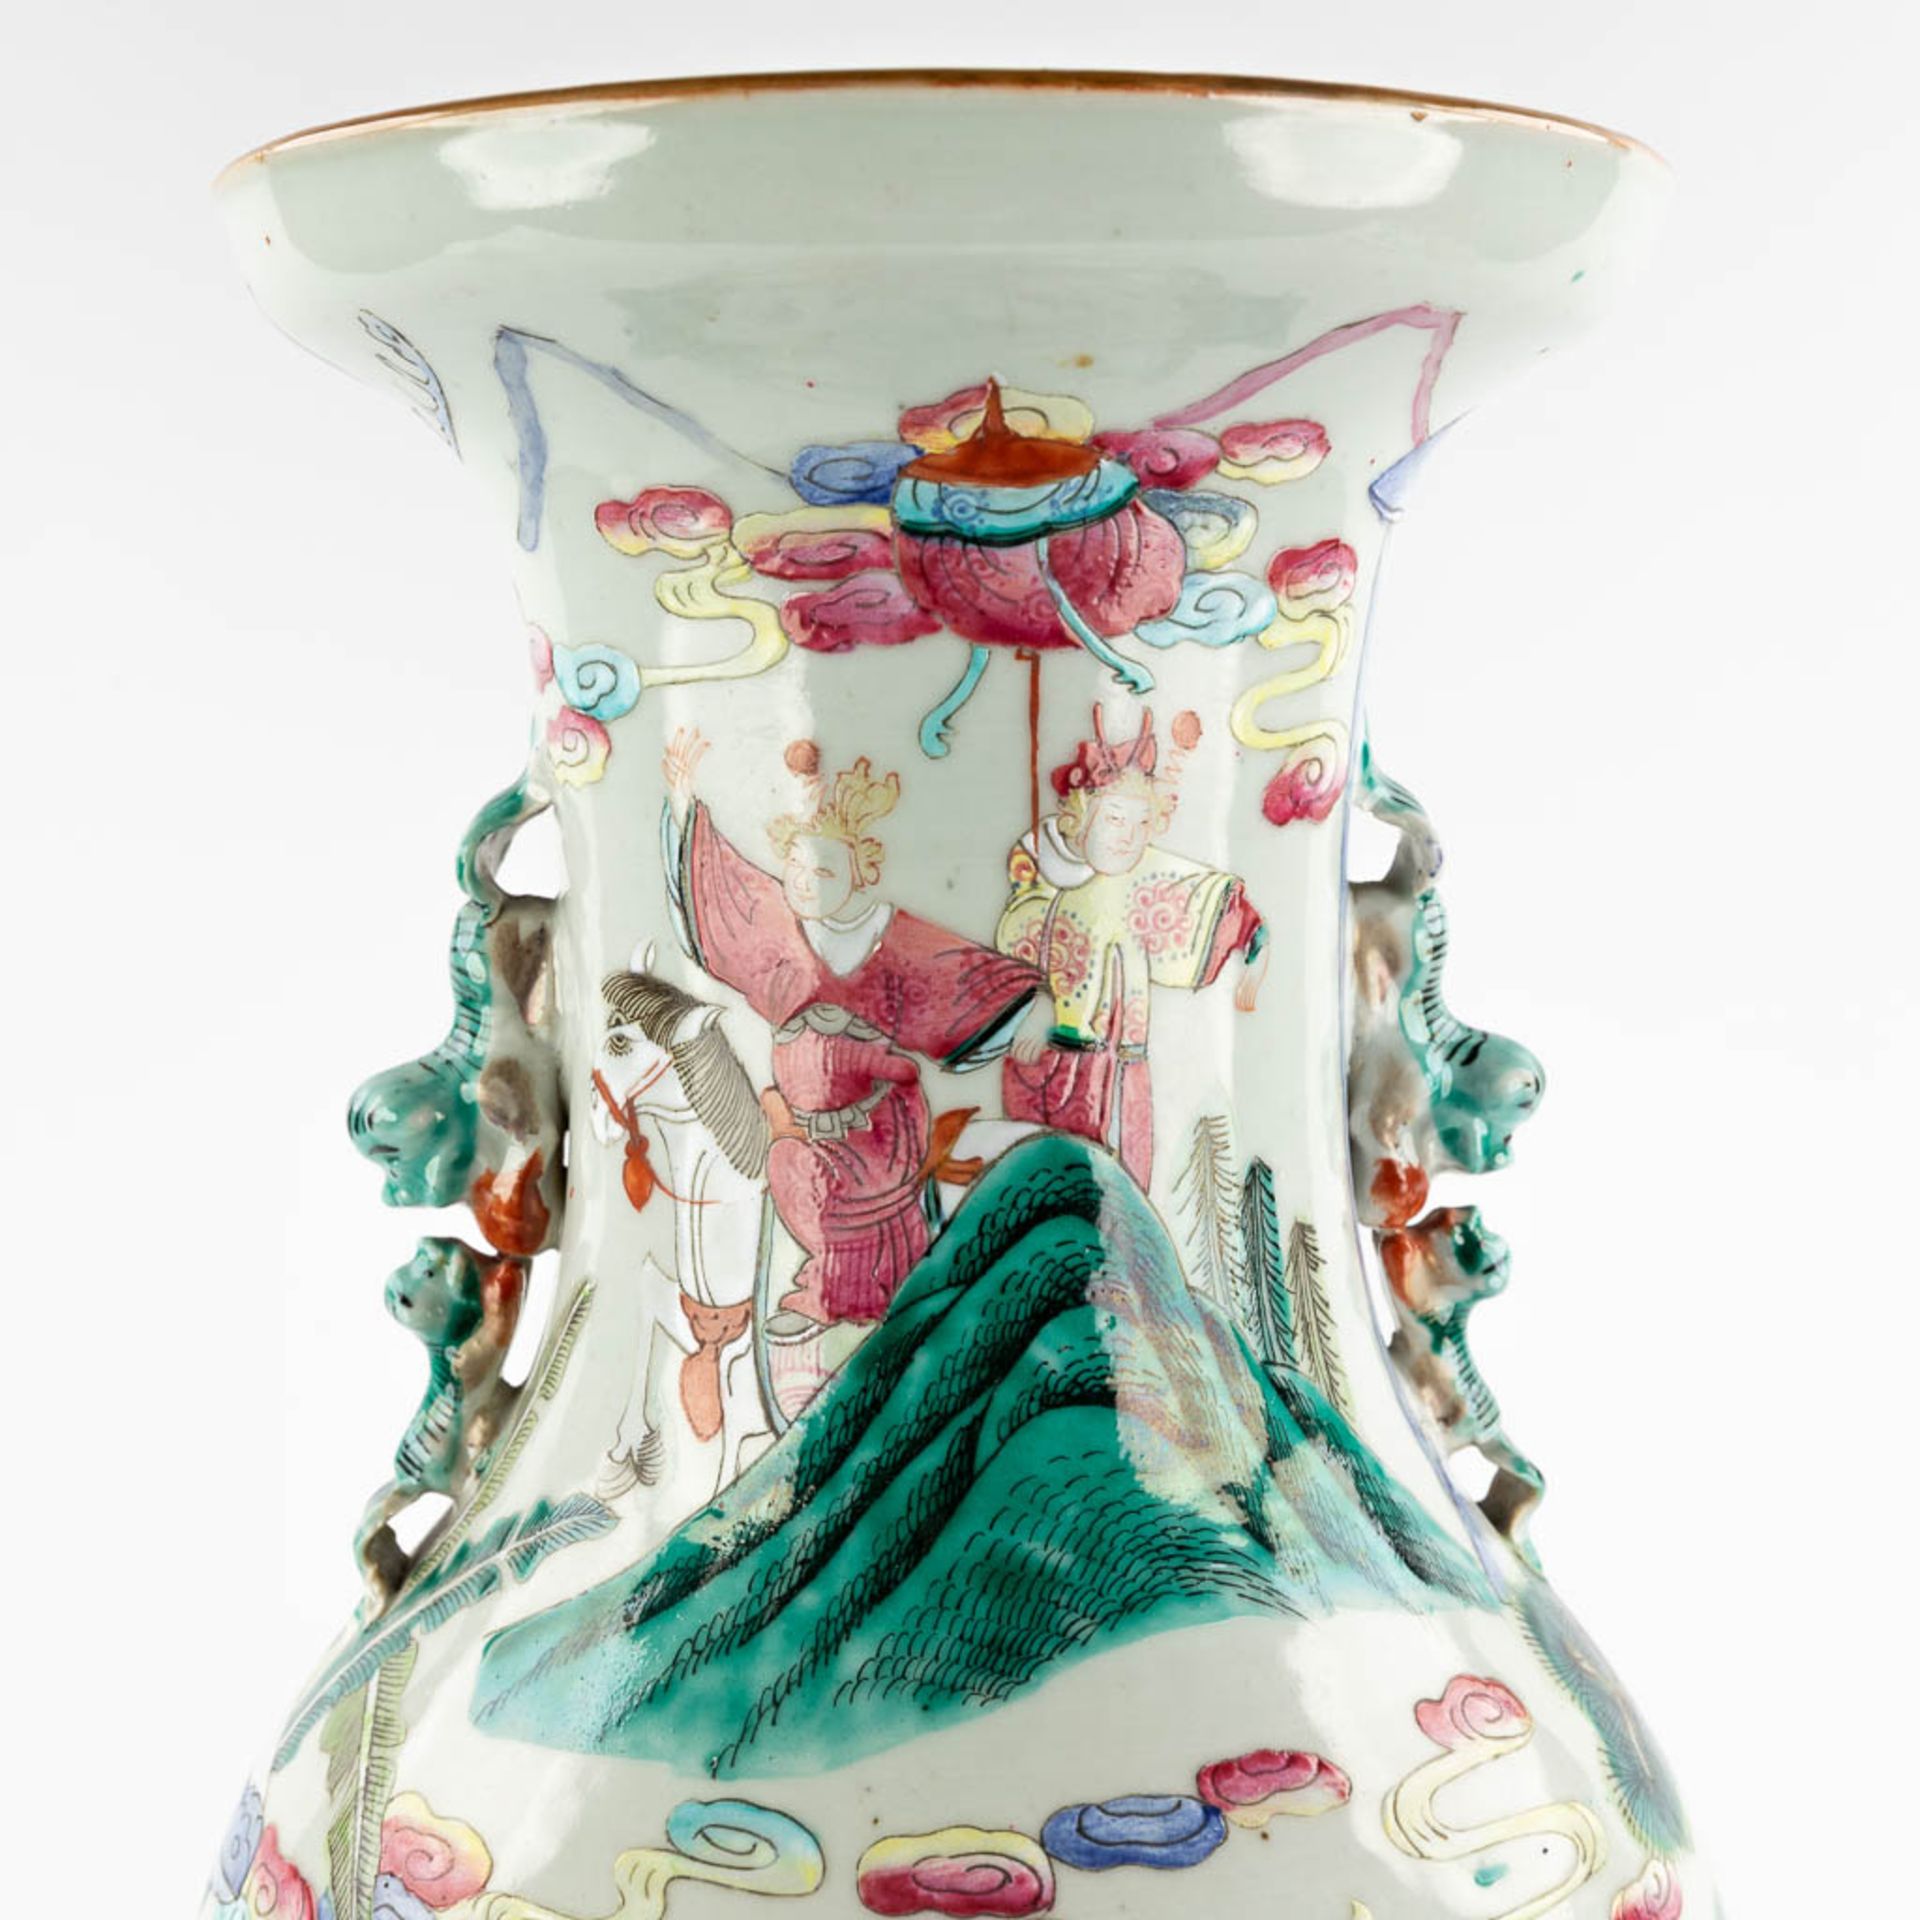 A pair of Chinese vases with Famille Rose vases with a temple scène, 19th C. (H:61 x D:23 cm) - Image 9 of 12